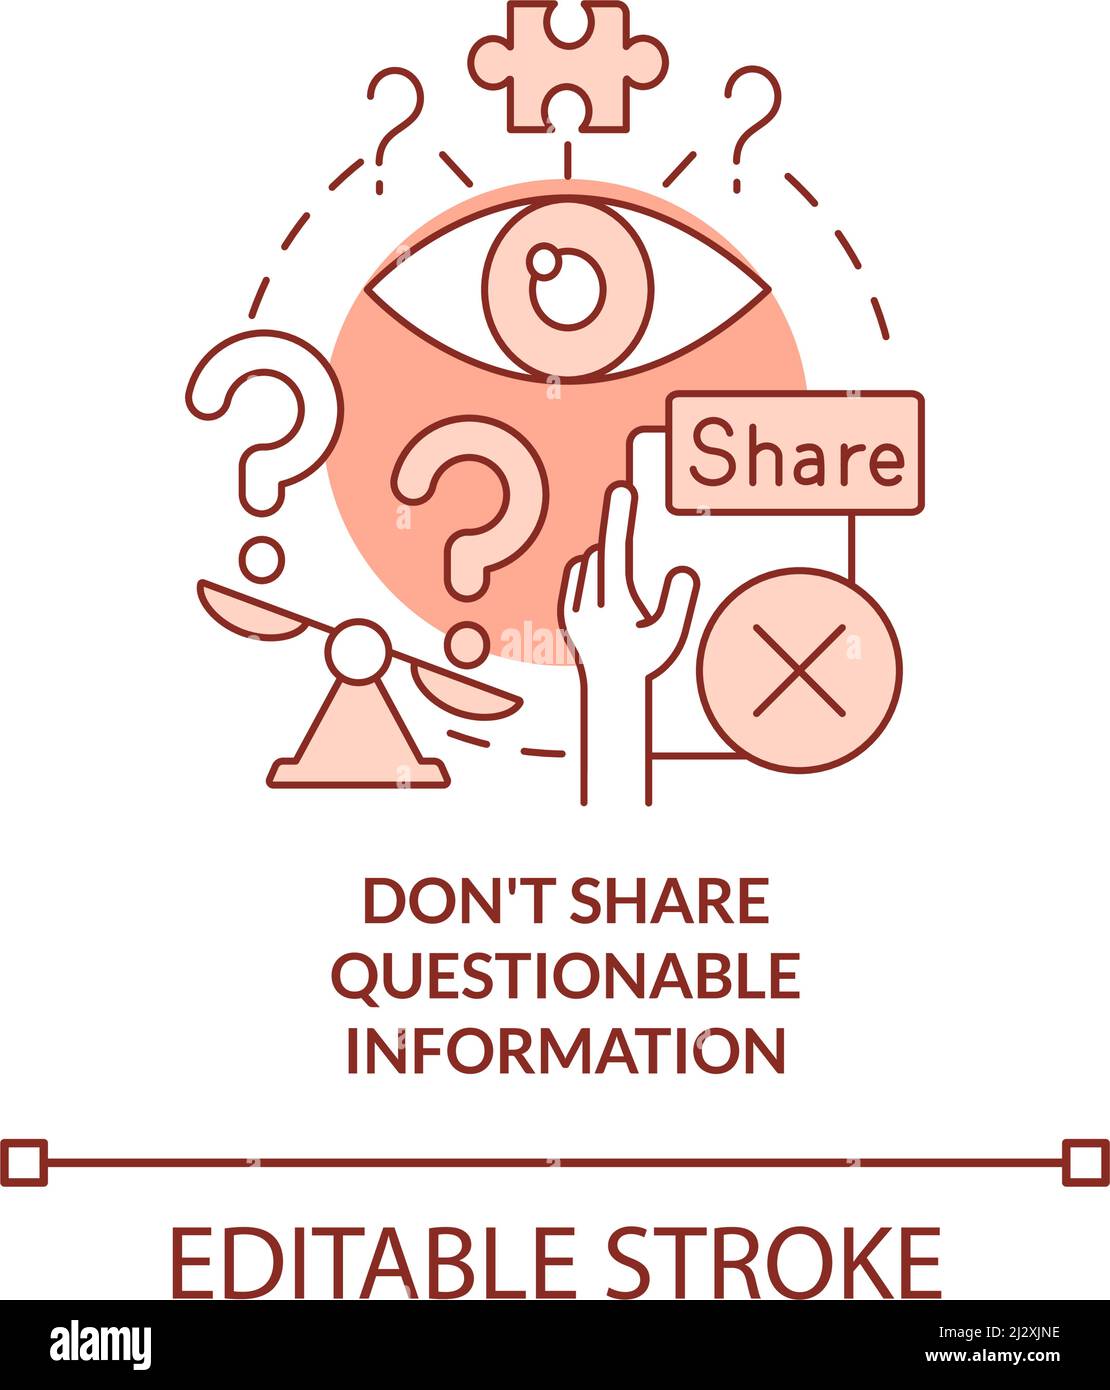 Do not share questionable information red concept icon Stock Vector